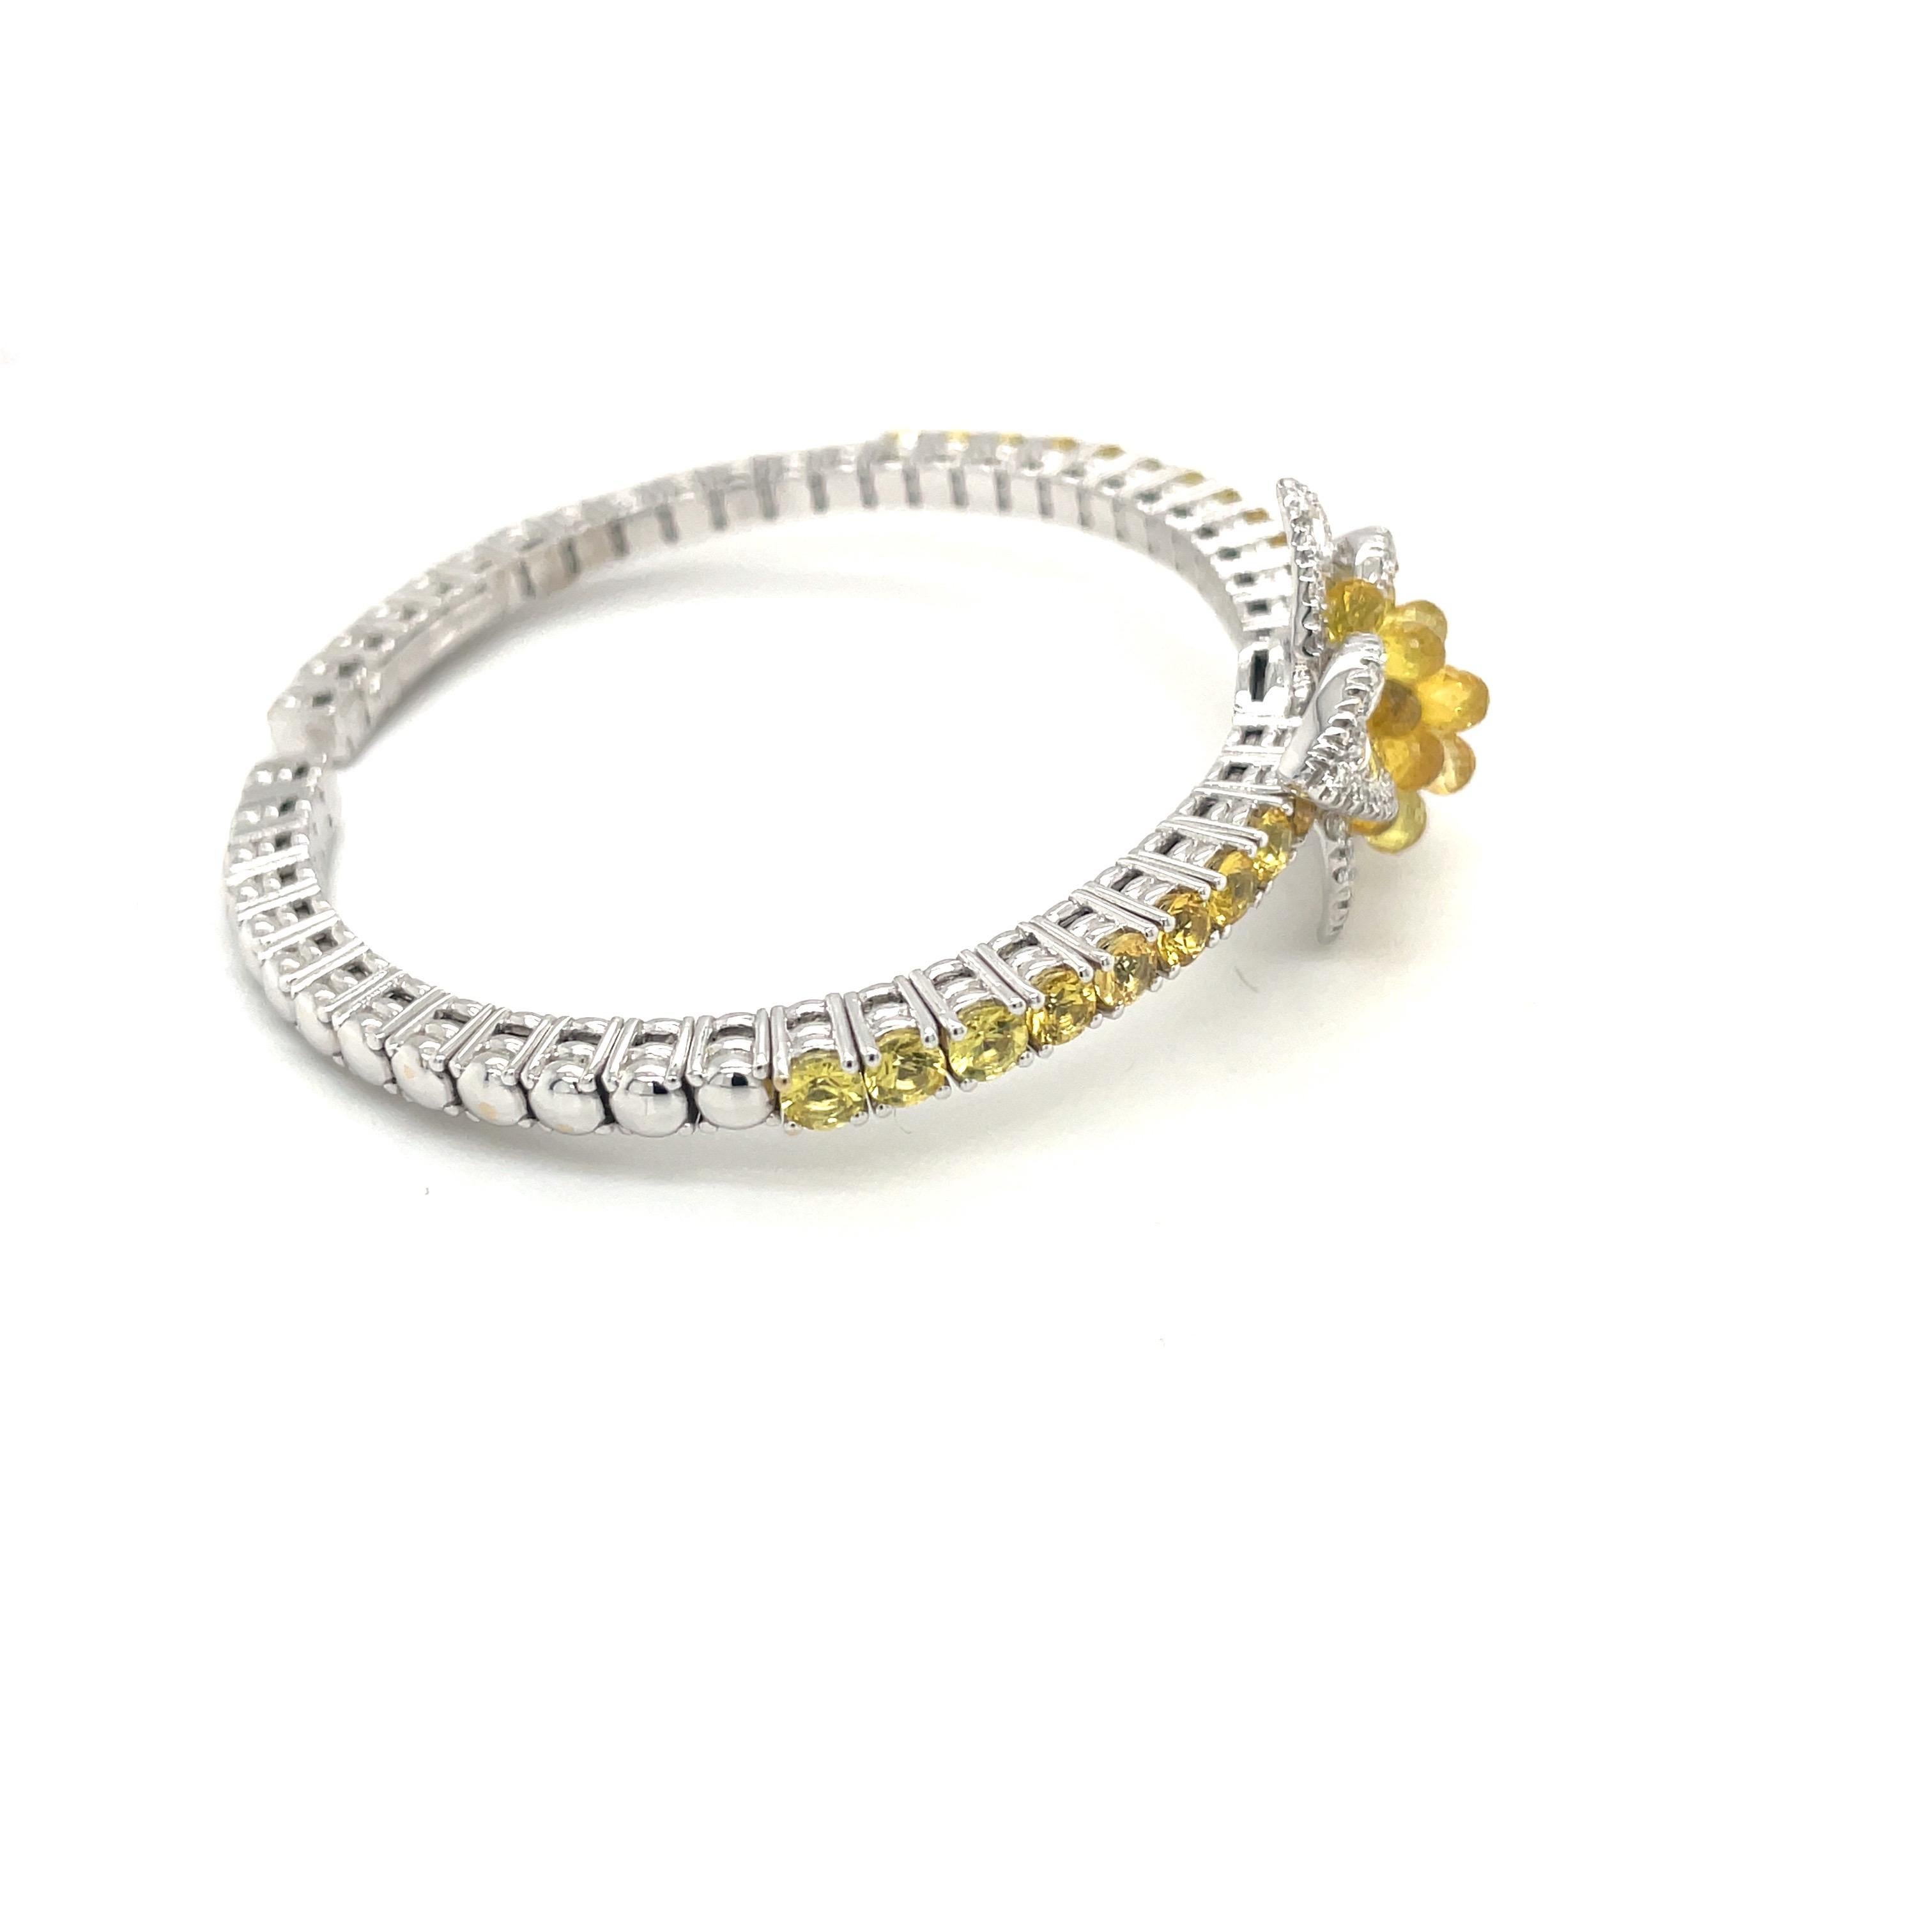 This uniquely stunning flower bracelet is composed of .87 carats of round brilliant and rose cut diamonds, and 9.21 carats round and briolette cut yellow sapphires.
The briolette sapphires at the center of the diamond flower are raised , allowing